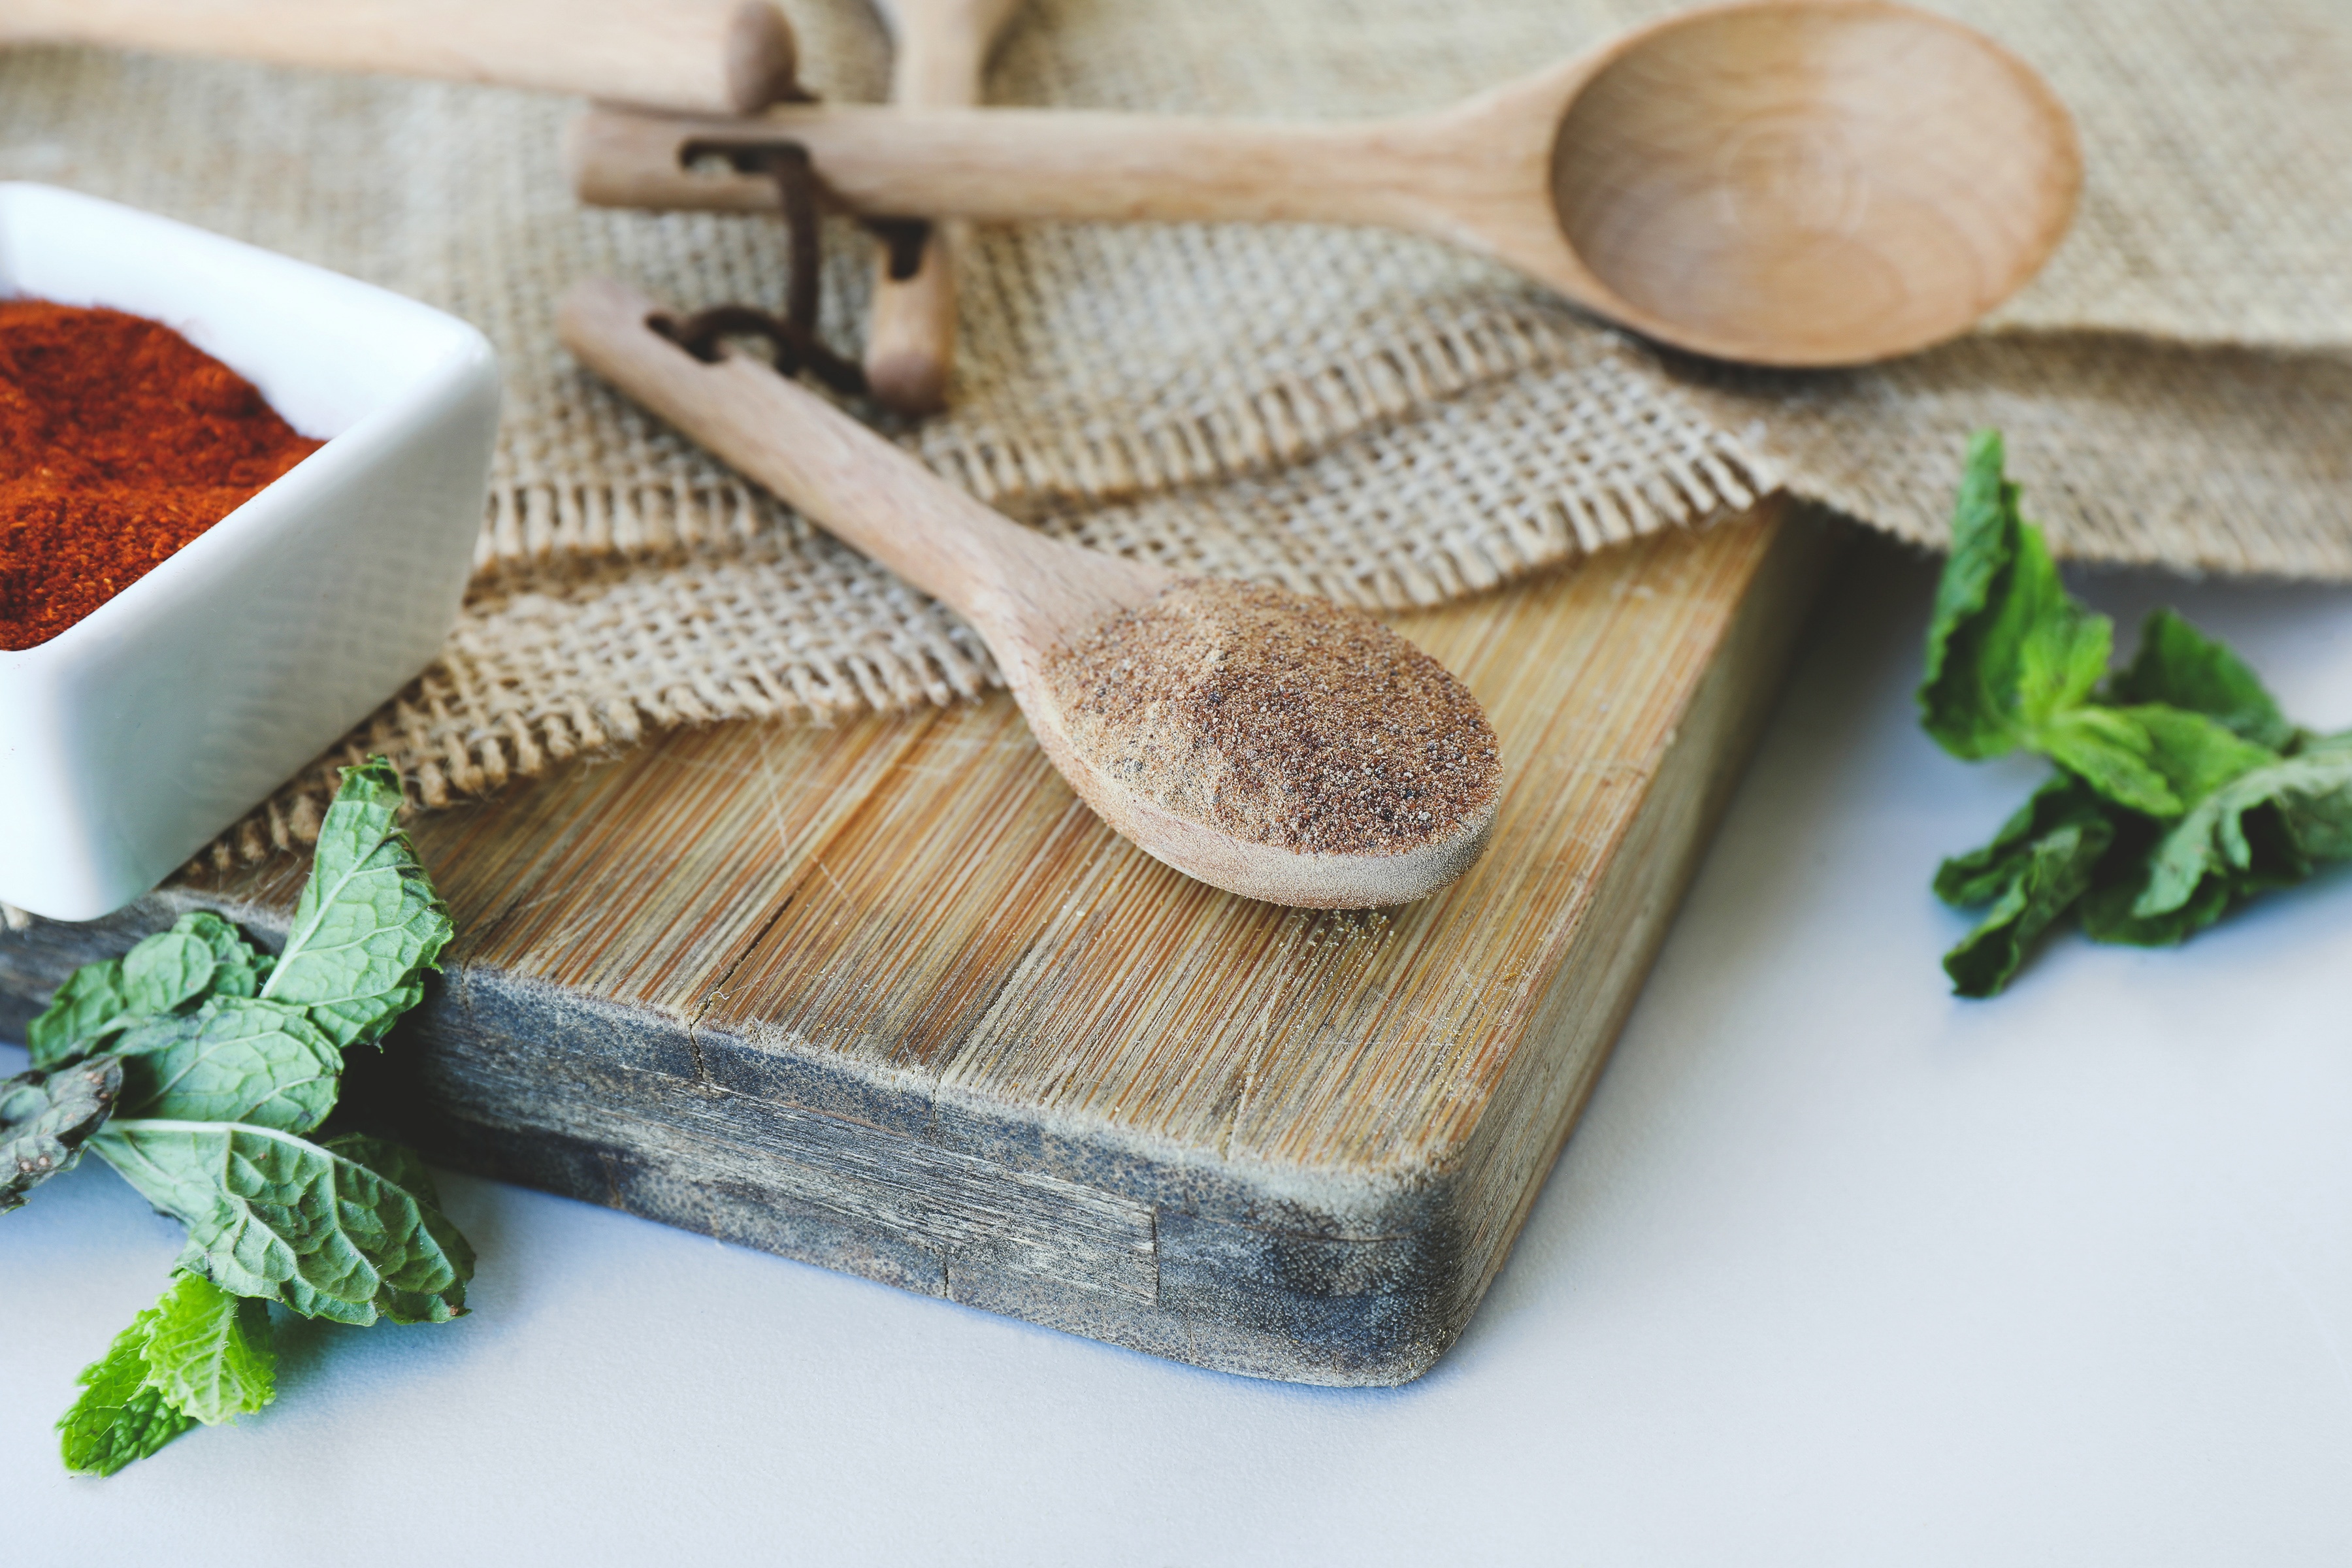 Wooden spoon filled with amla powder and other herbs on cutting board